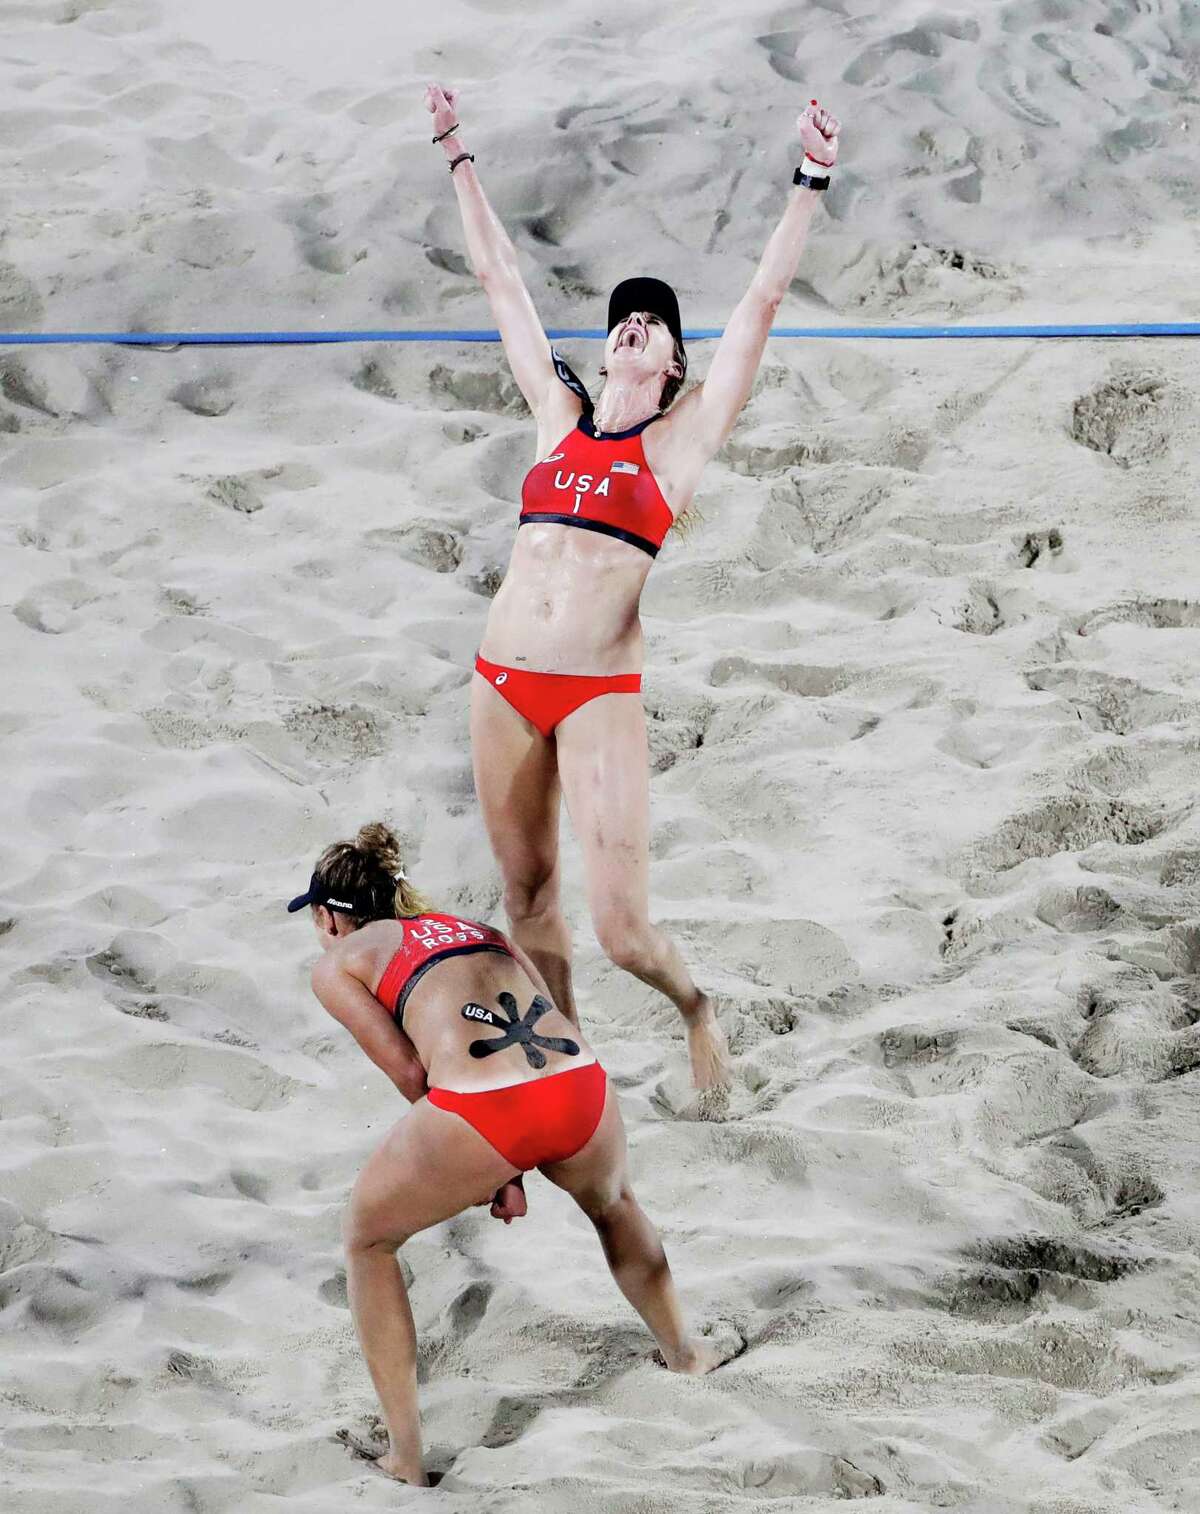 The United States' Kerri Walsh Jennings, top, and teammate April Ross celebrate after winning a point against Brazil's Larissa Franca and Talita Rocha during the women's beach volleyball bronze medal match at the 2016 Summer Olympics in Rio de Janeiro, Brazil, Wednesday, Aug. 17, 2016. (AP Photo/David Goldman)